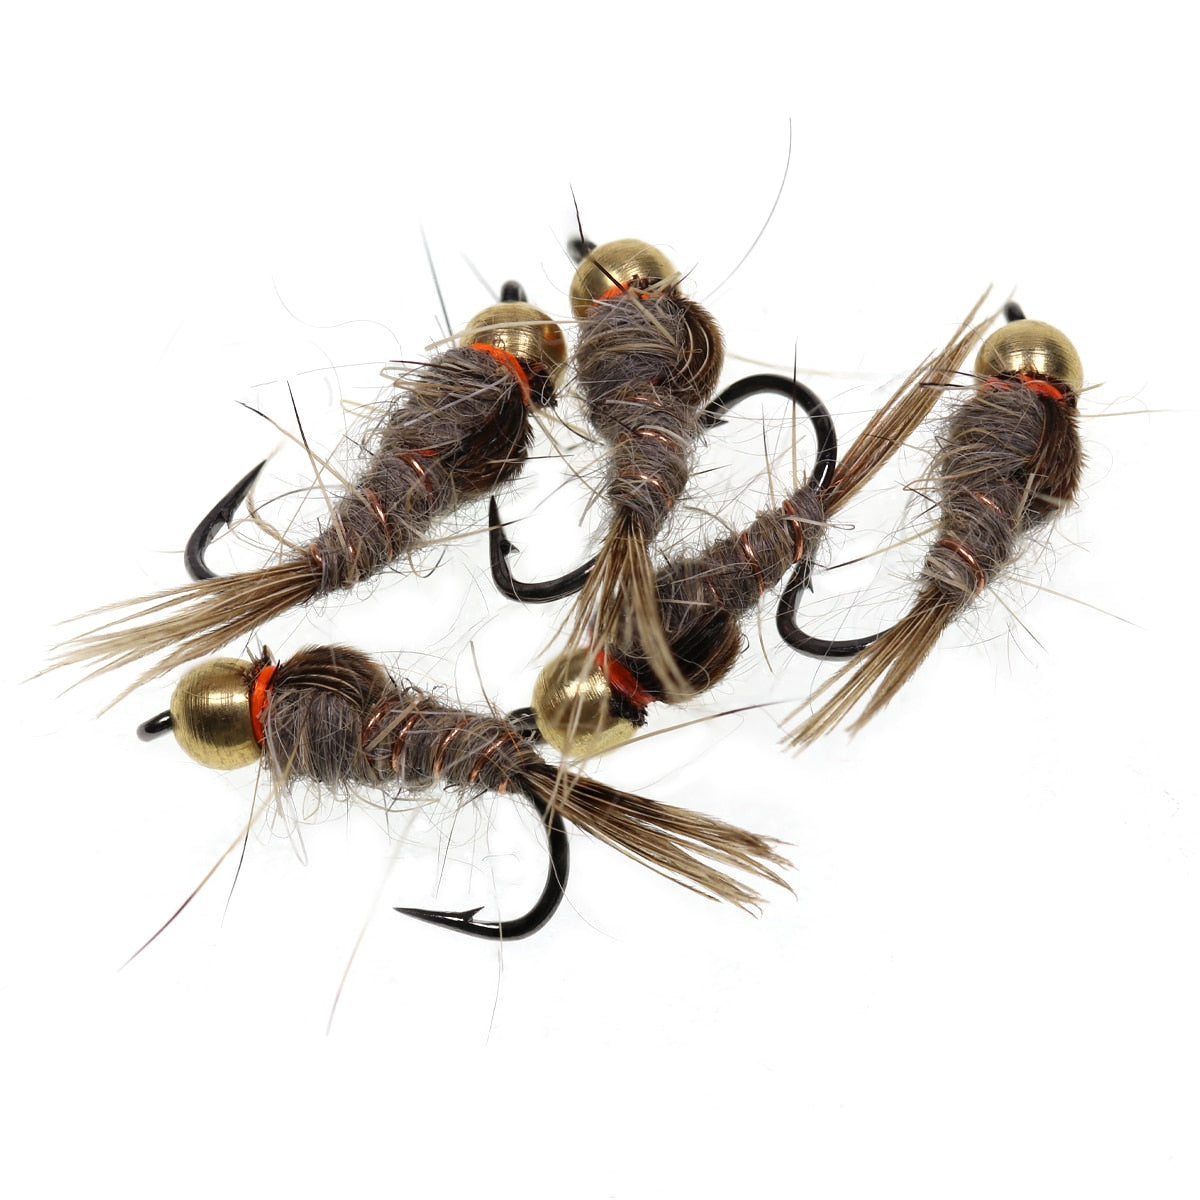 Bimoo 10PCS Classic #14 Brass Bead Weighted Hare's Ear Fly Trout Fishing Wet / Nymph Fly Lure Bait Olive Grey